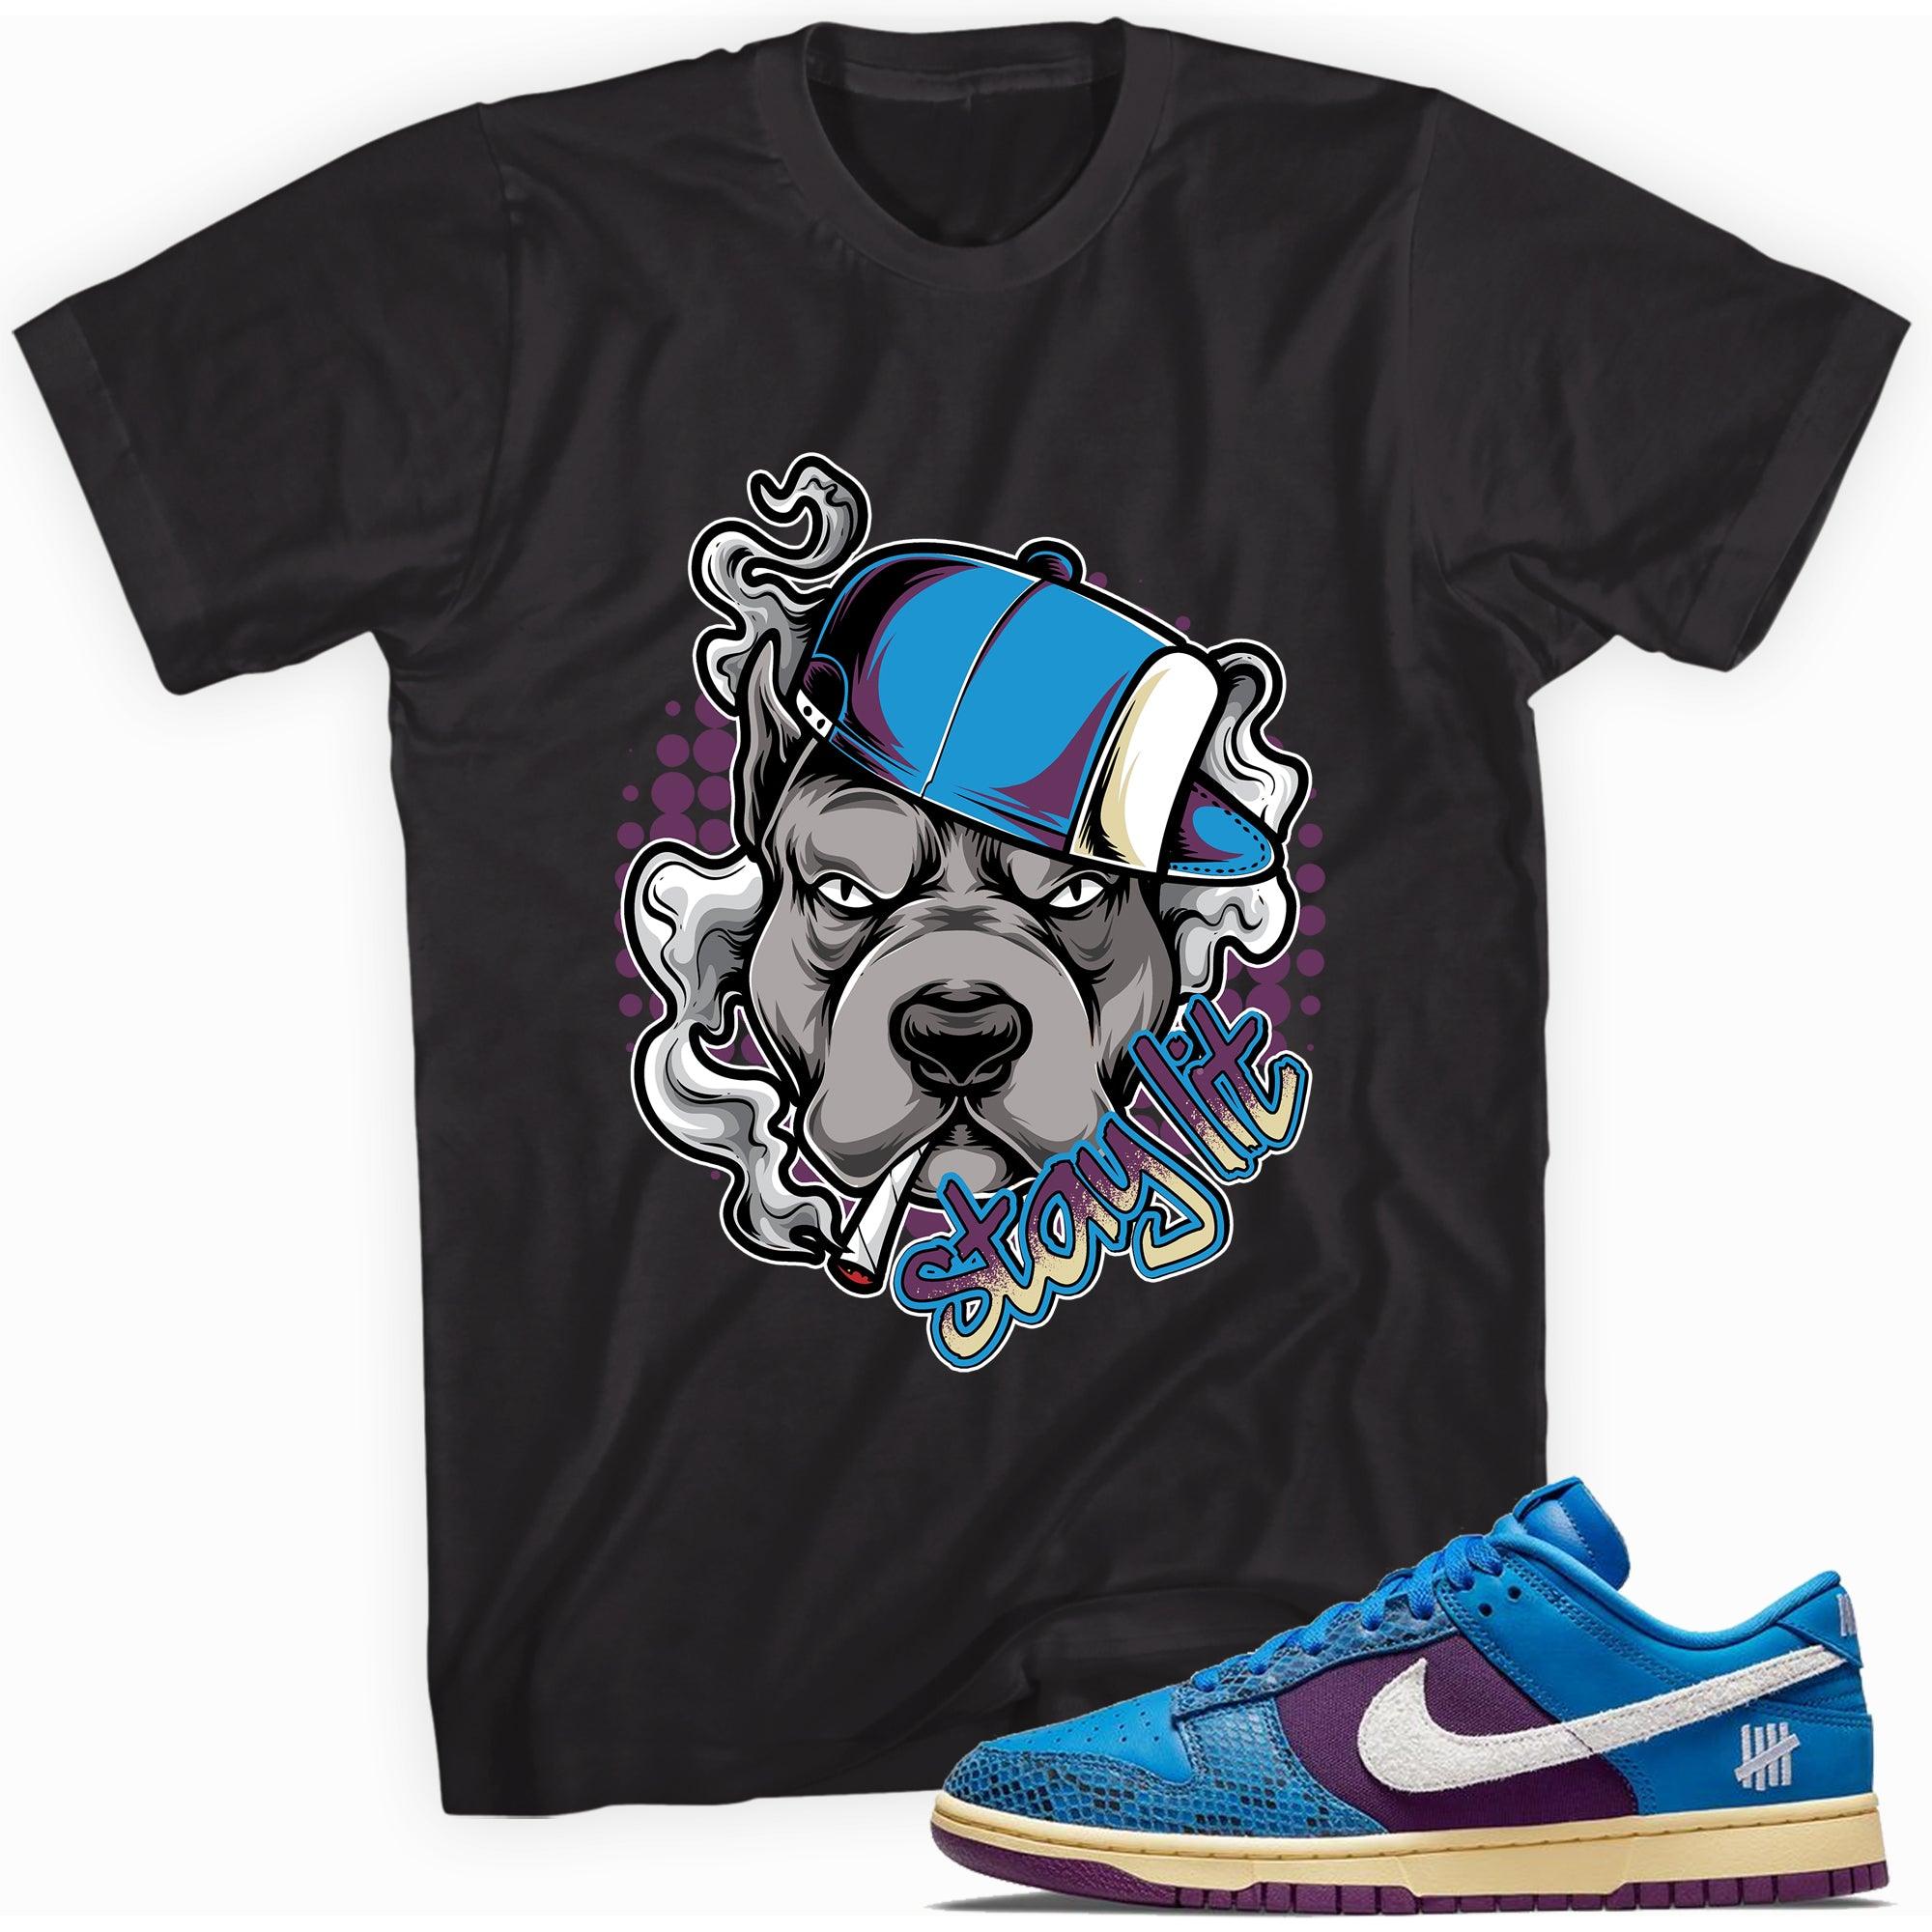 Stay Lit Shirt Nike Dunk Low Undefeated 5 On It Dunk vs AF1 Sneakers photo